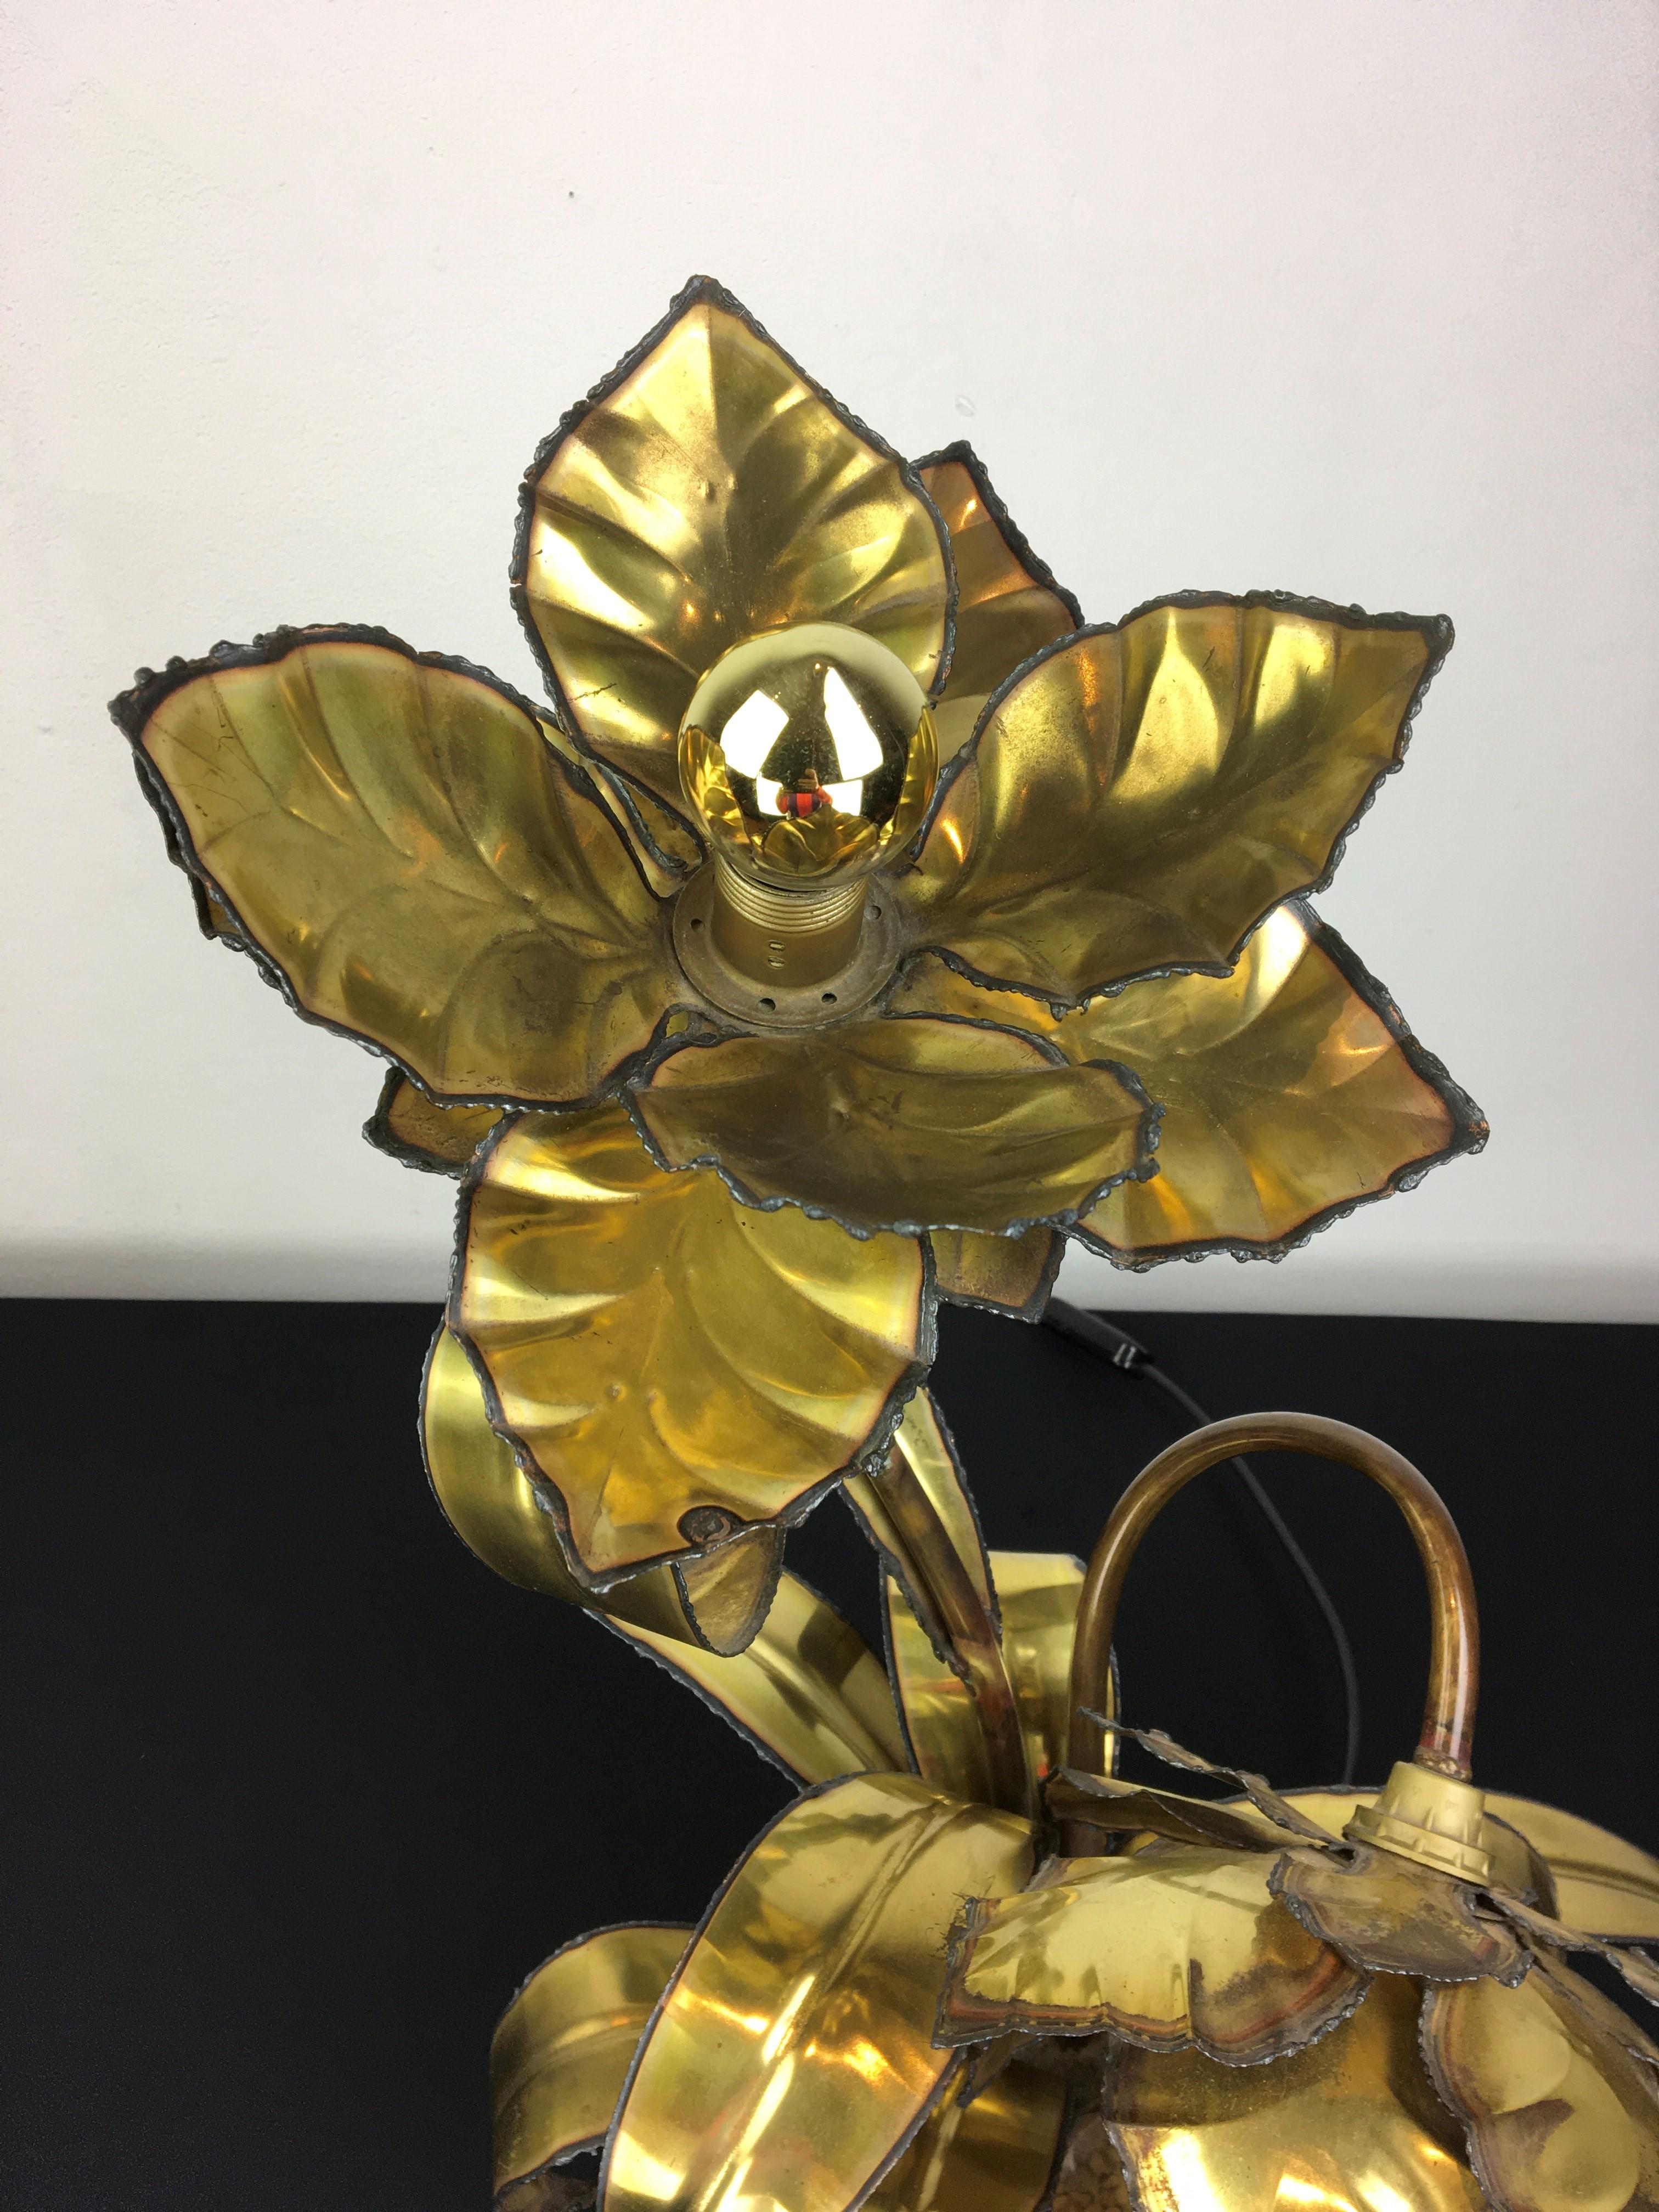 Maison Jansen flower table lamp. 
This 1970s French cut brass table light has 2 flowers , one flower up and one flower down. The flower lamp - flower plant has a round base filled with white little stones.
It's very stylish and timeless lighting